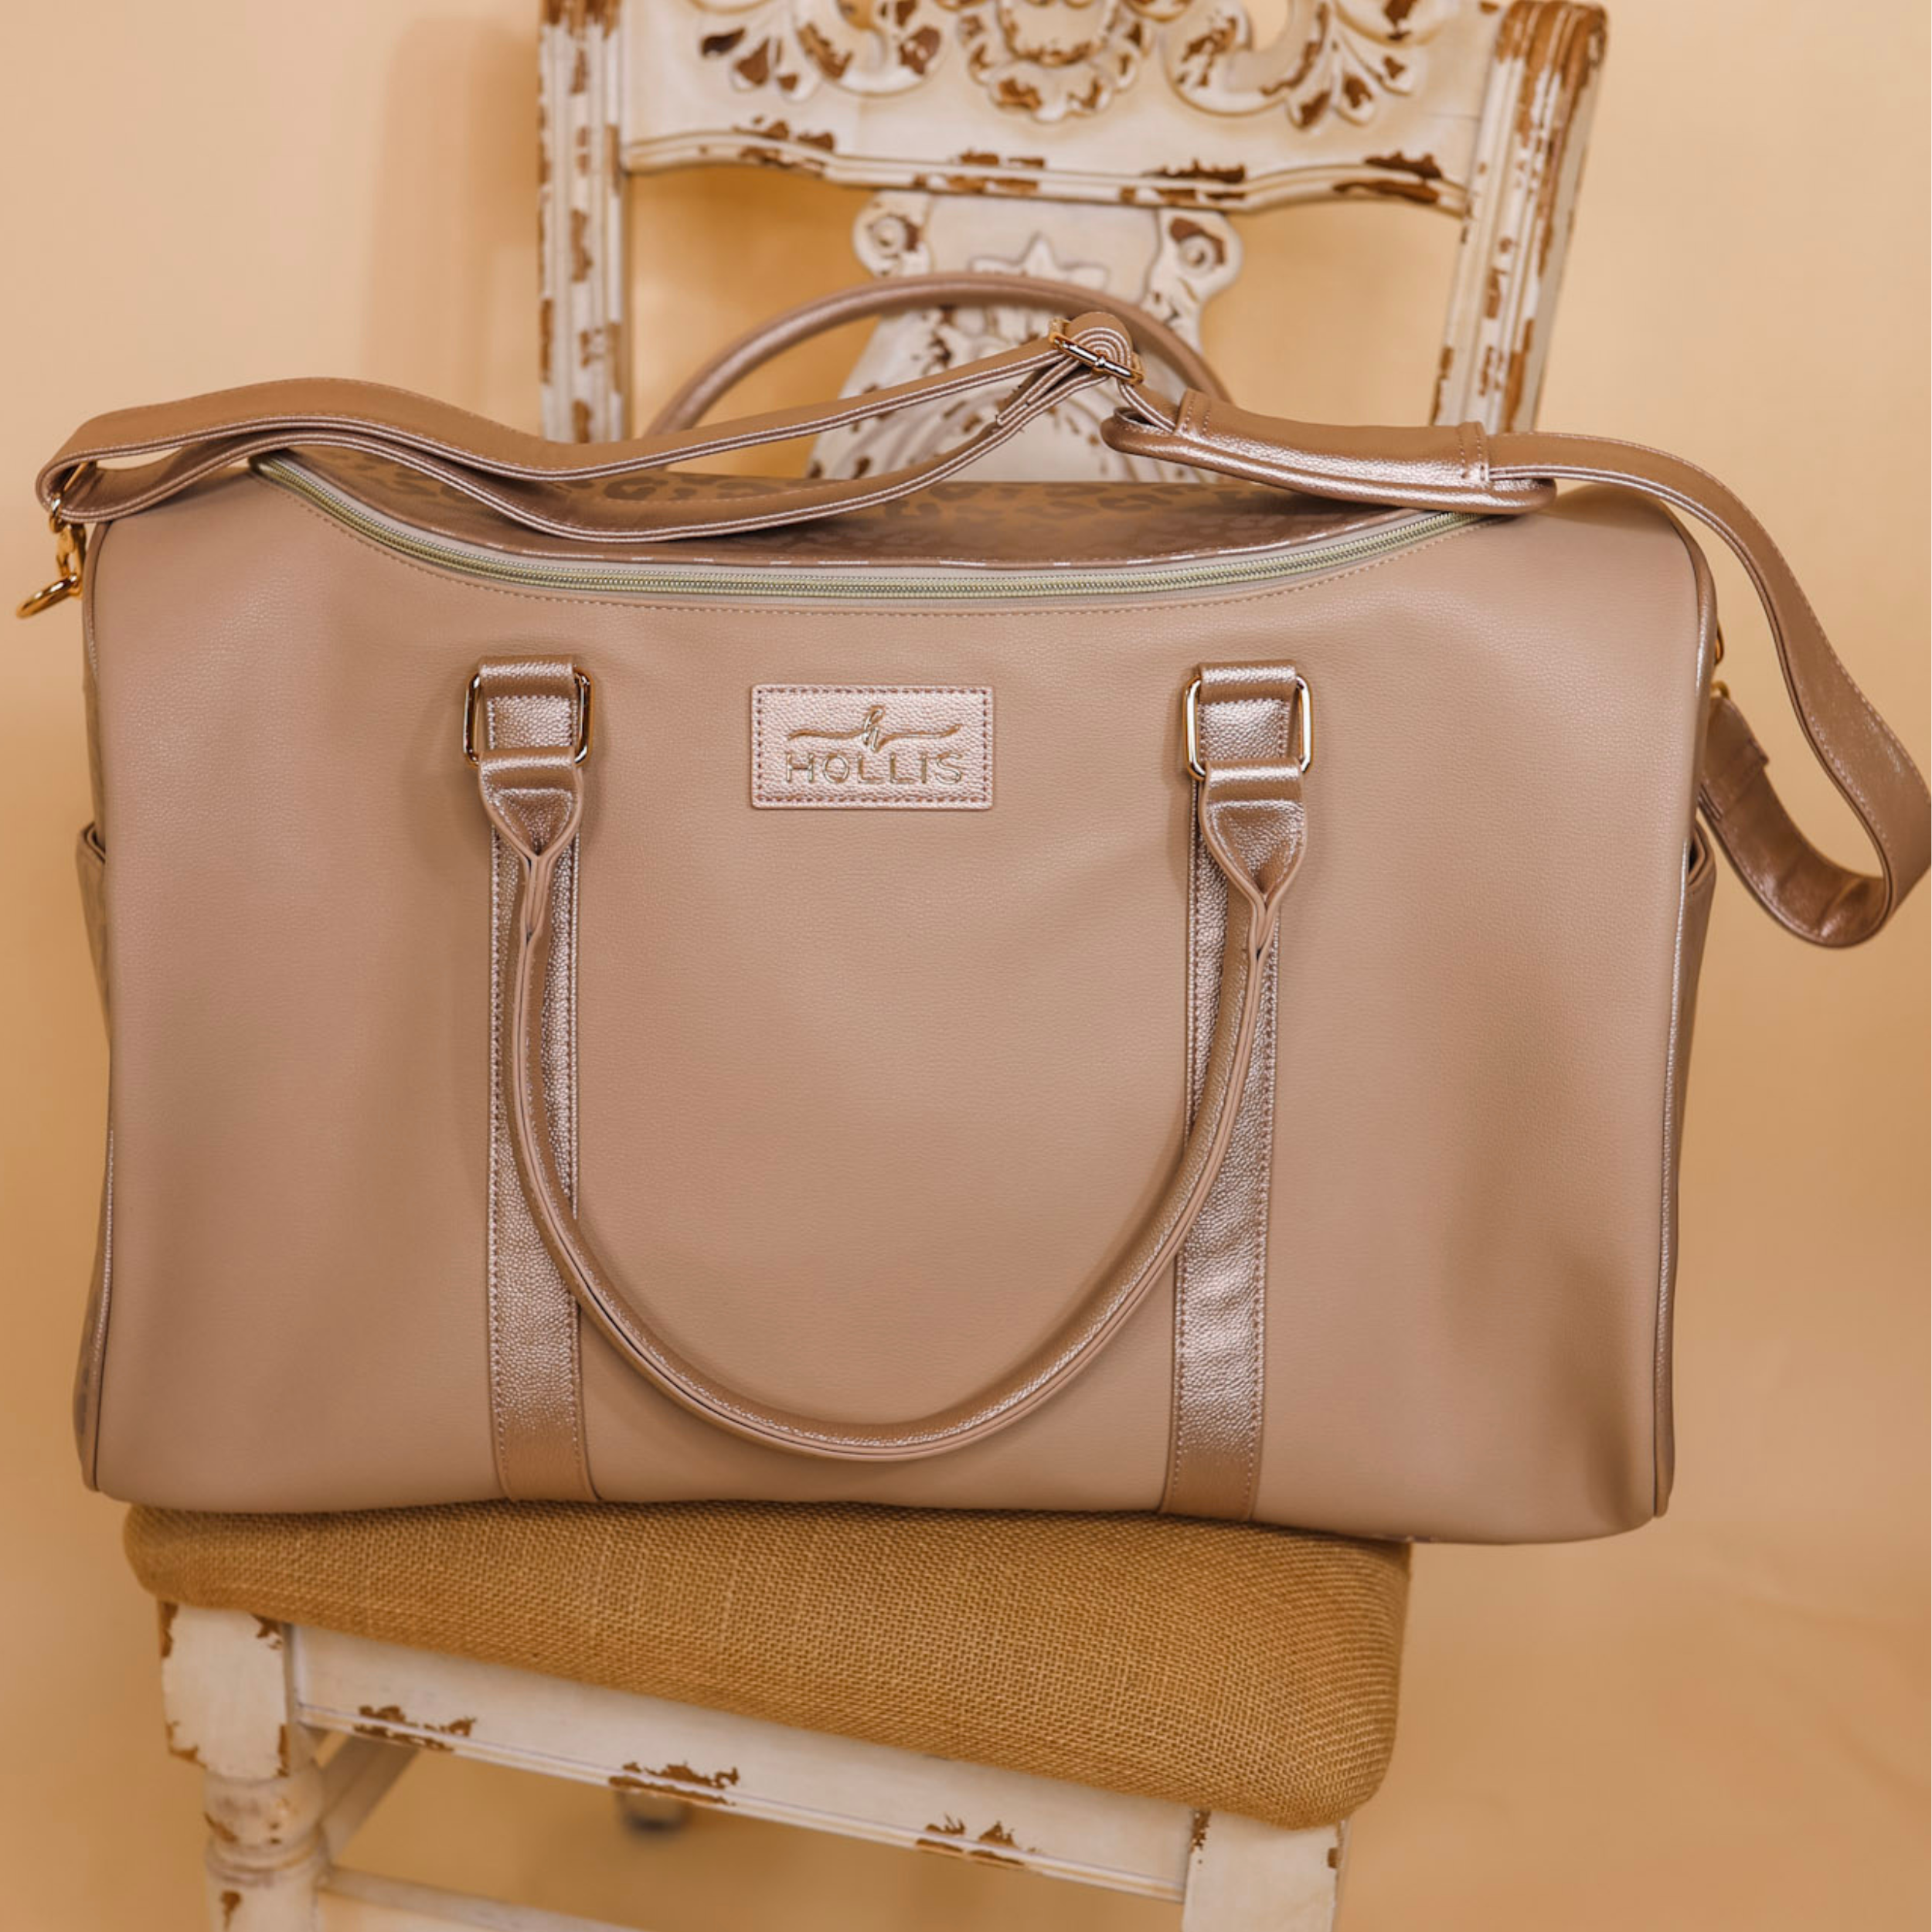 A large nude weekender bag is set on a chair in the middle of the picture. Background is solid tan. 